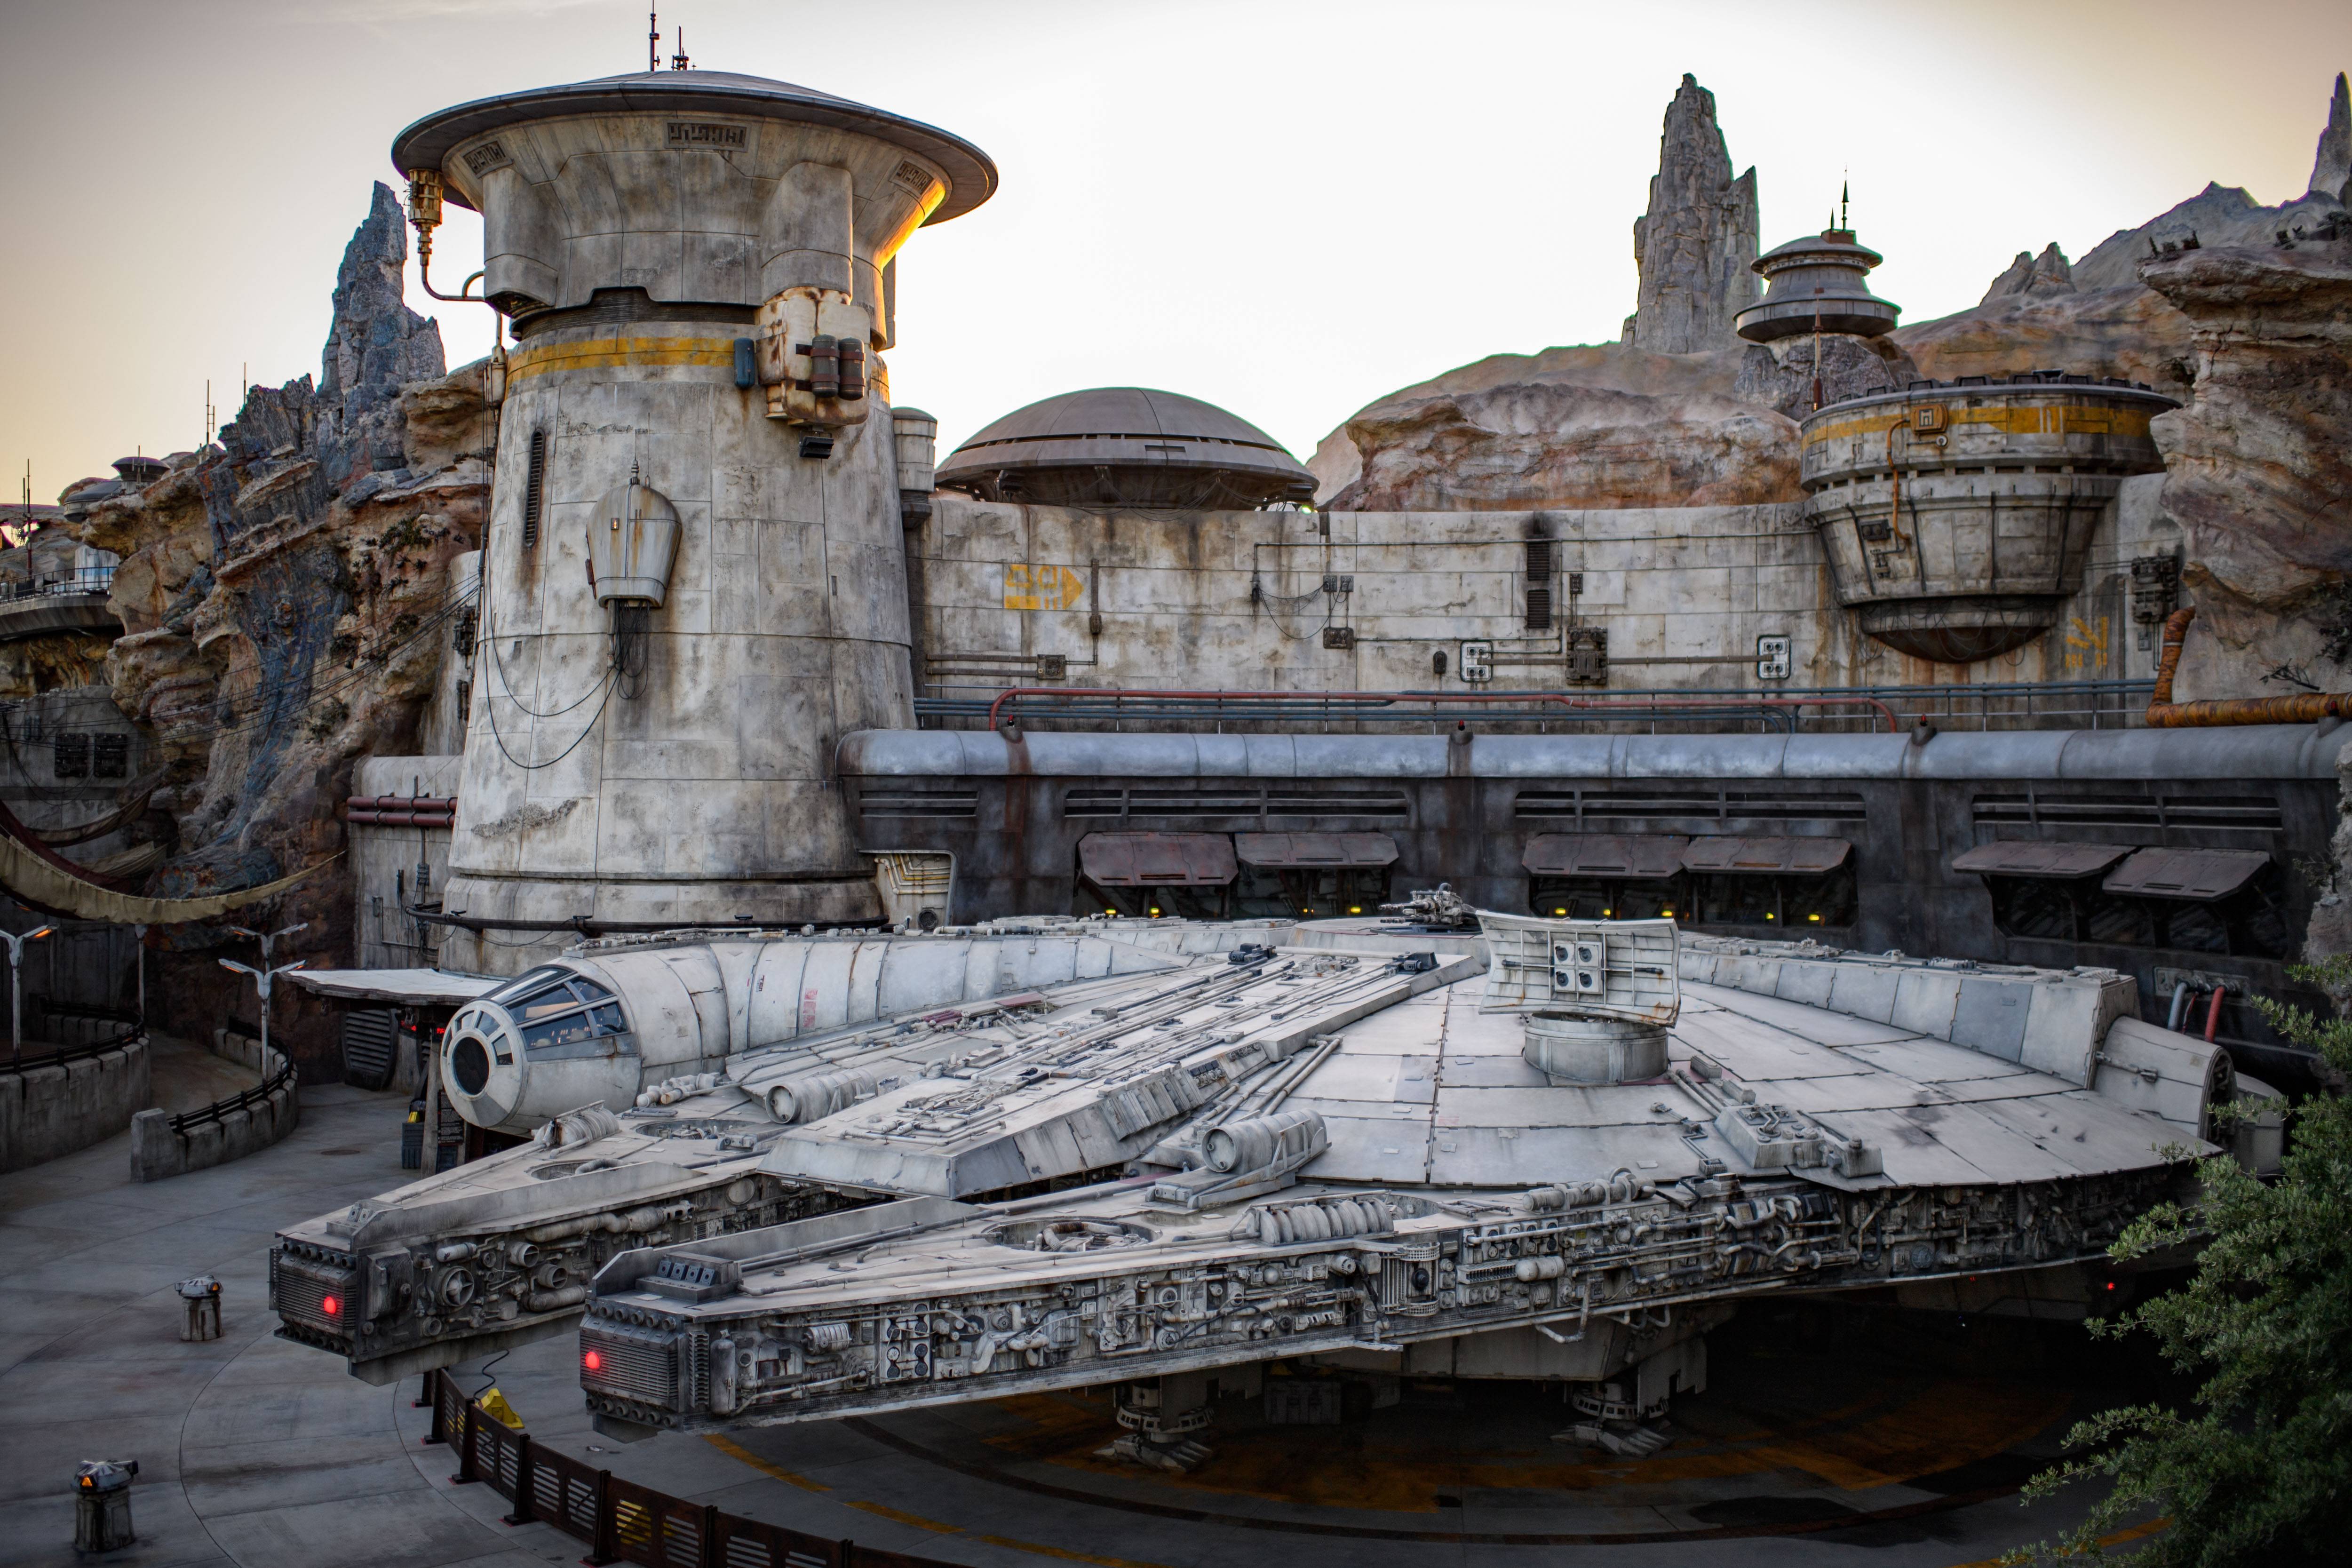 Millennium Falcon Smugglers Run overview